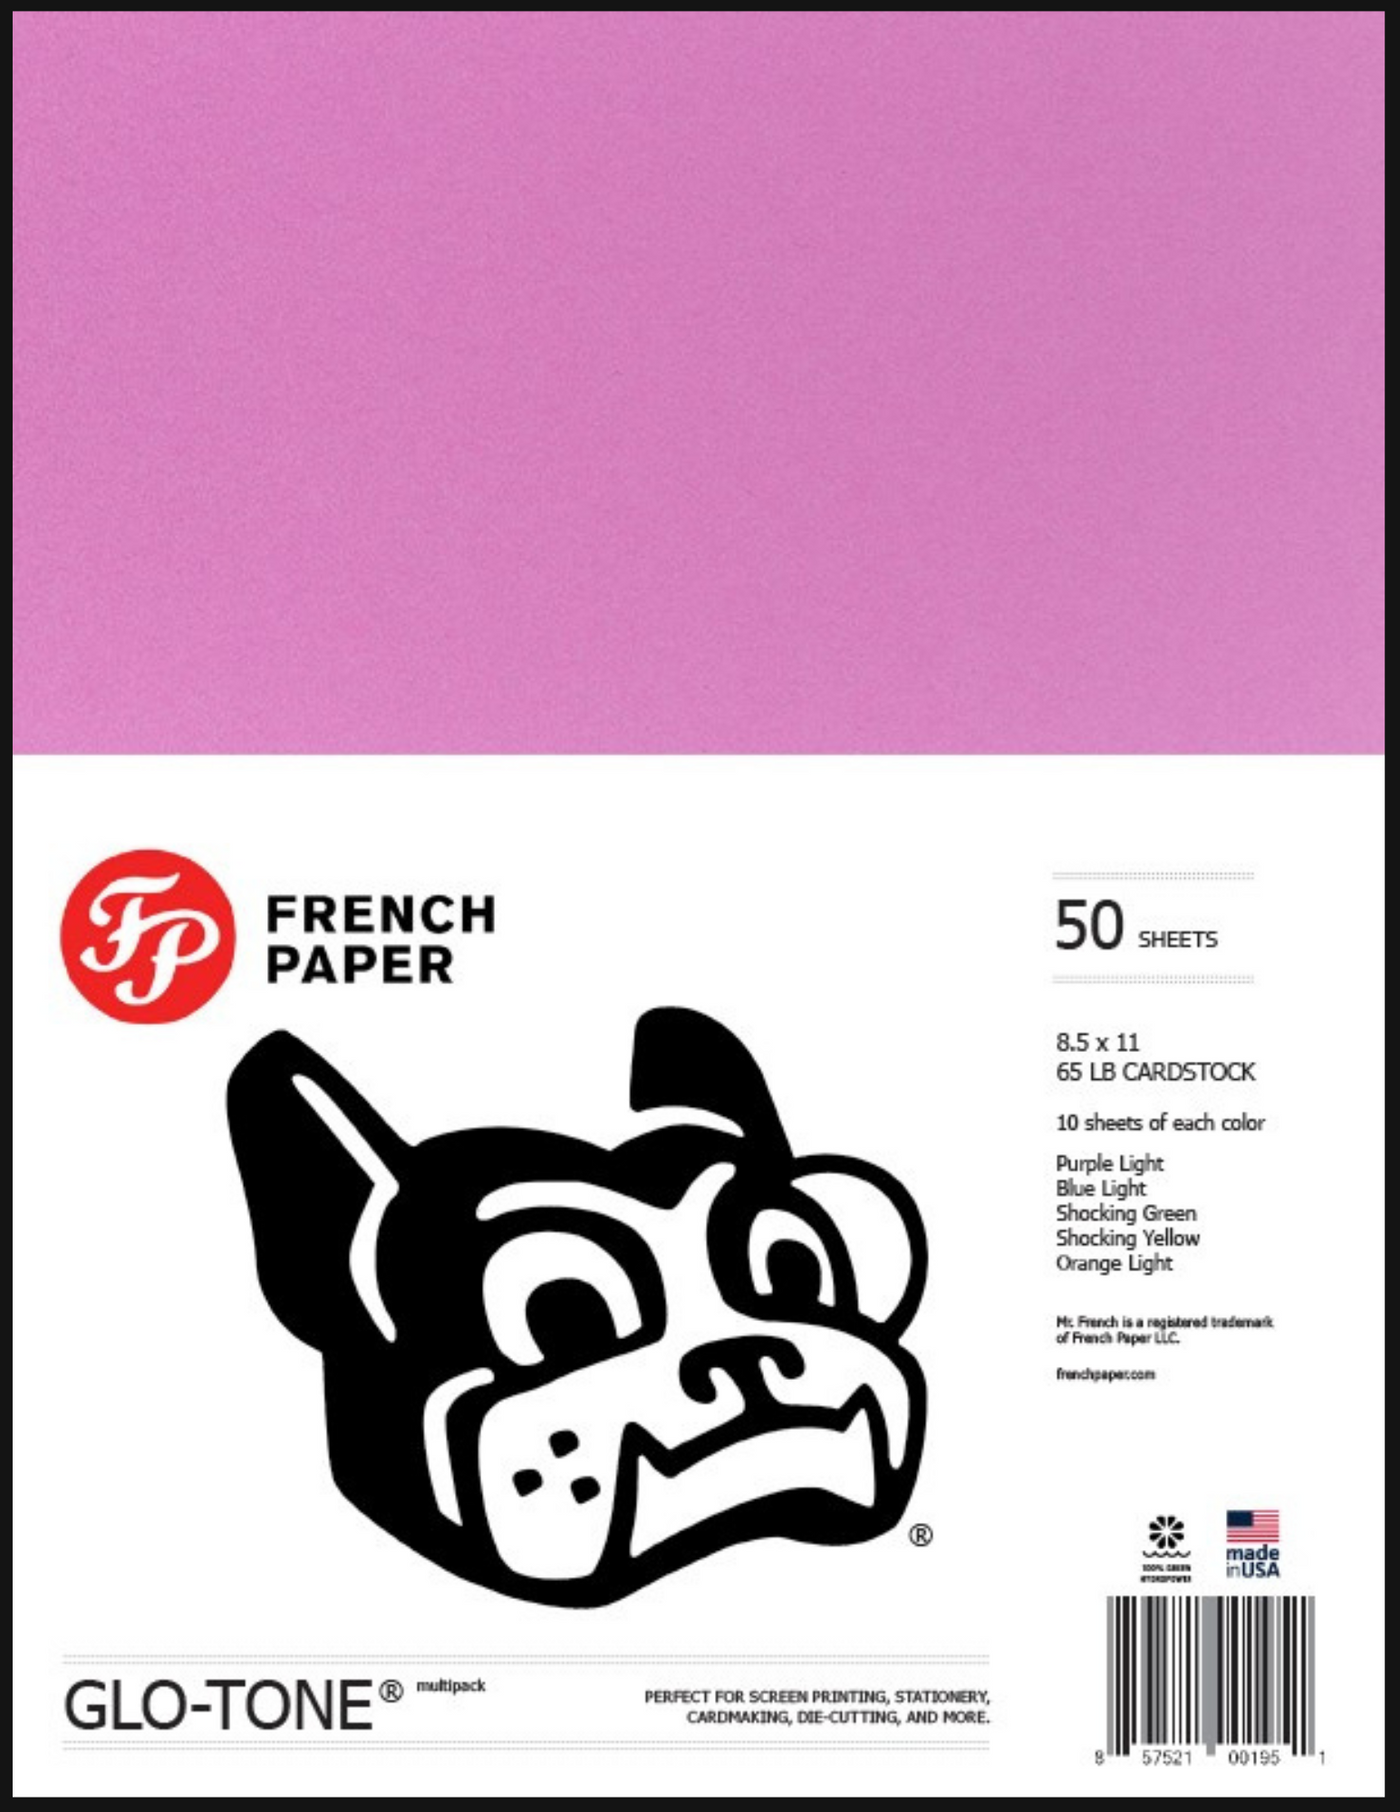 Shocking Pink Cardstock (Glo-Tone, Cover Weight)